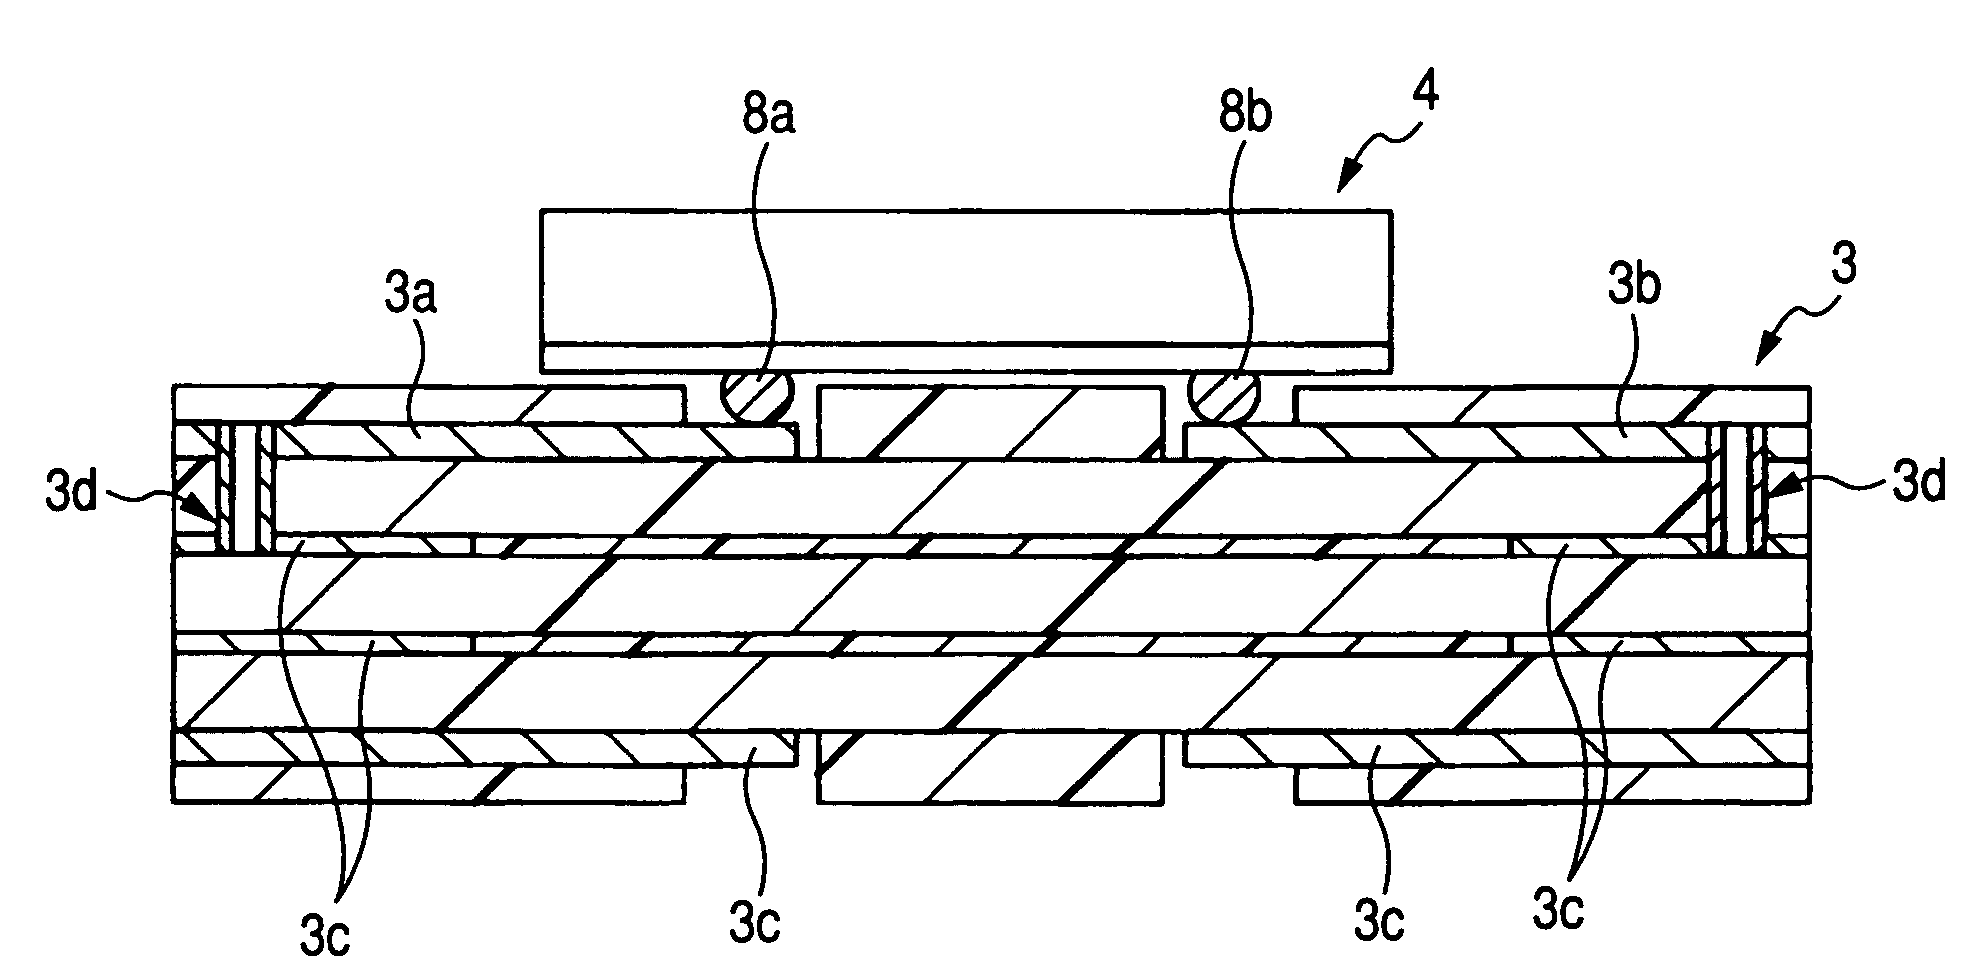 Semiconductor device including amplifier and frequency converter